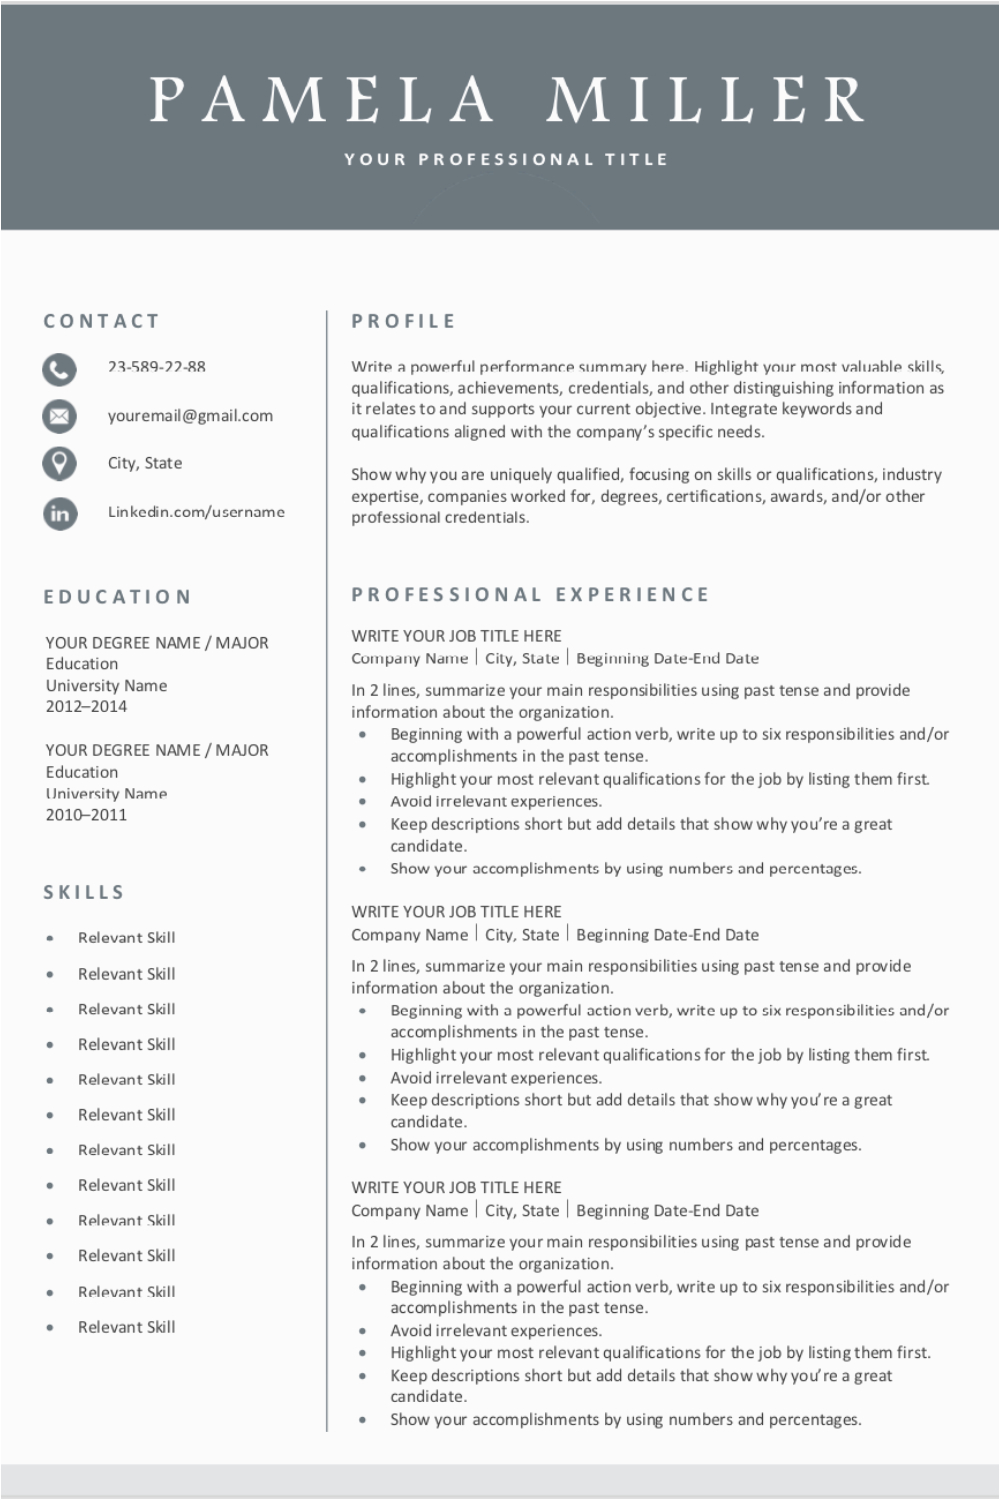 Free Resume Templates for It Professionals Free Resume Template